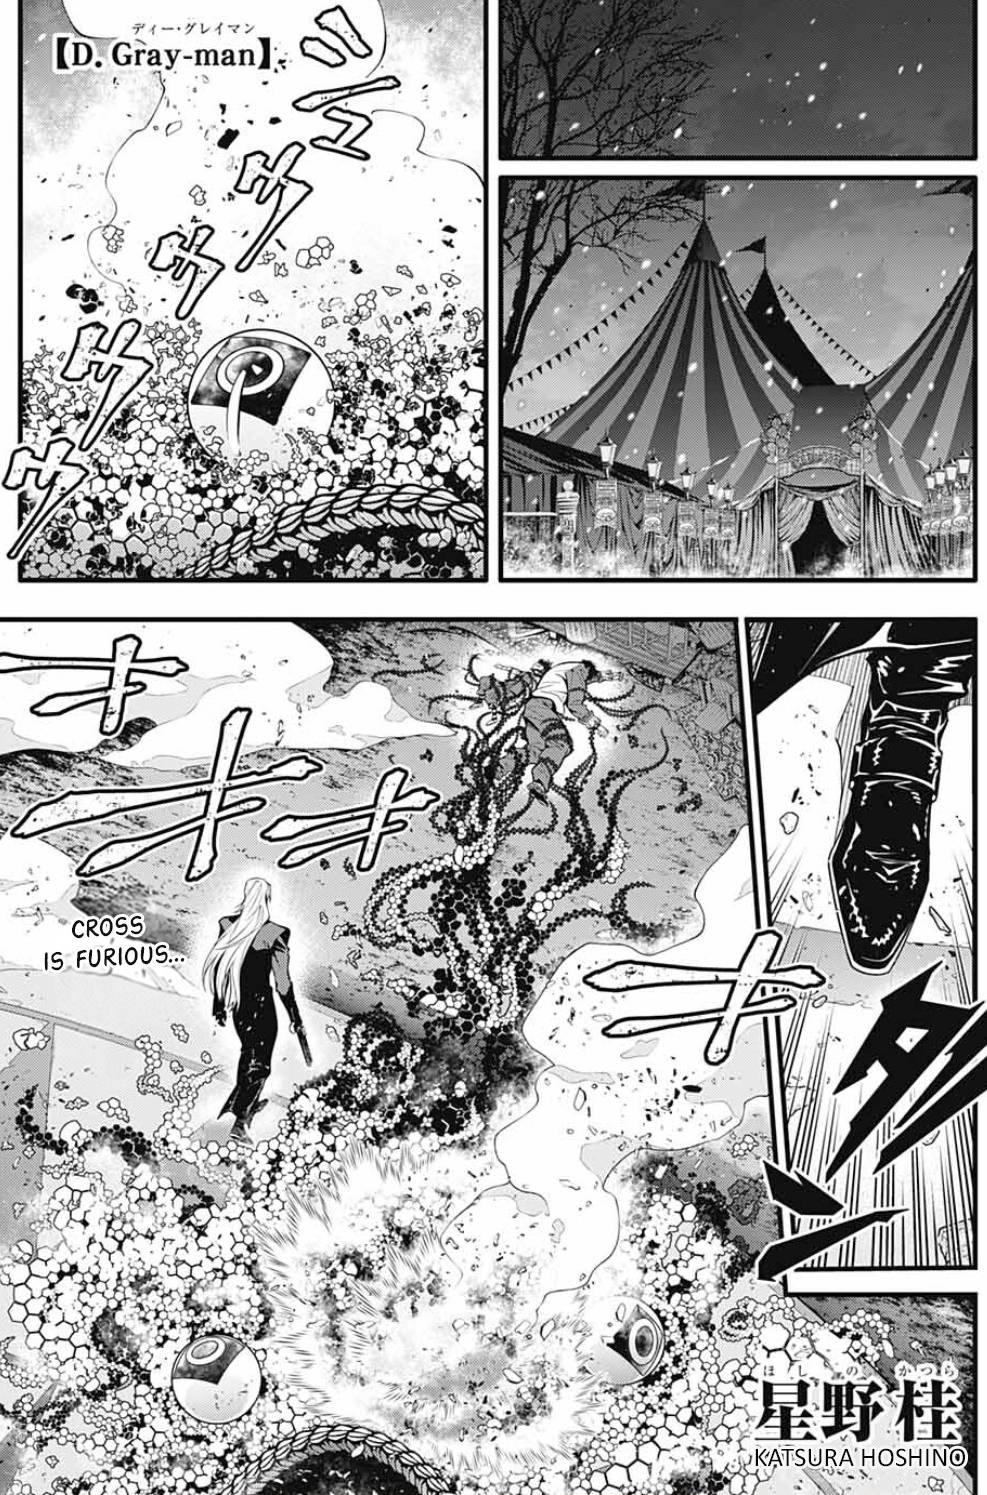 D.Gray-man chapter 245 page 2